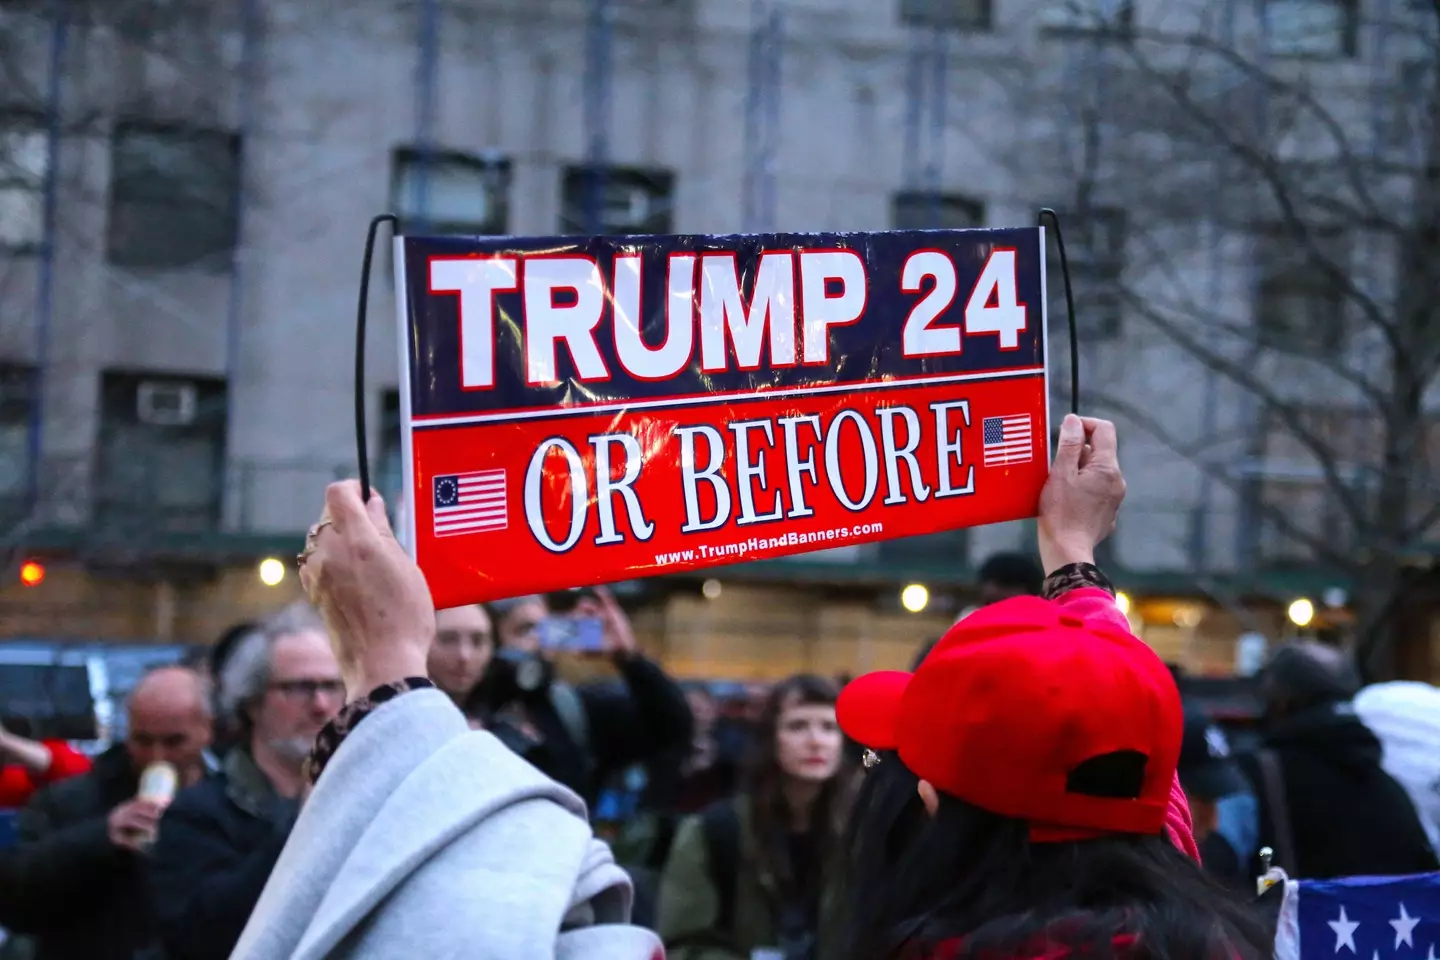 A Trump supporter at a rally in New York on Monday.